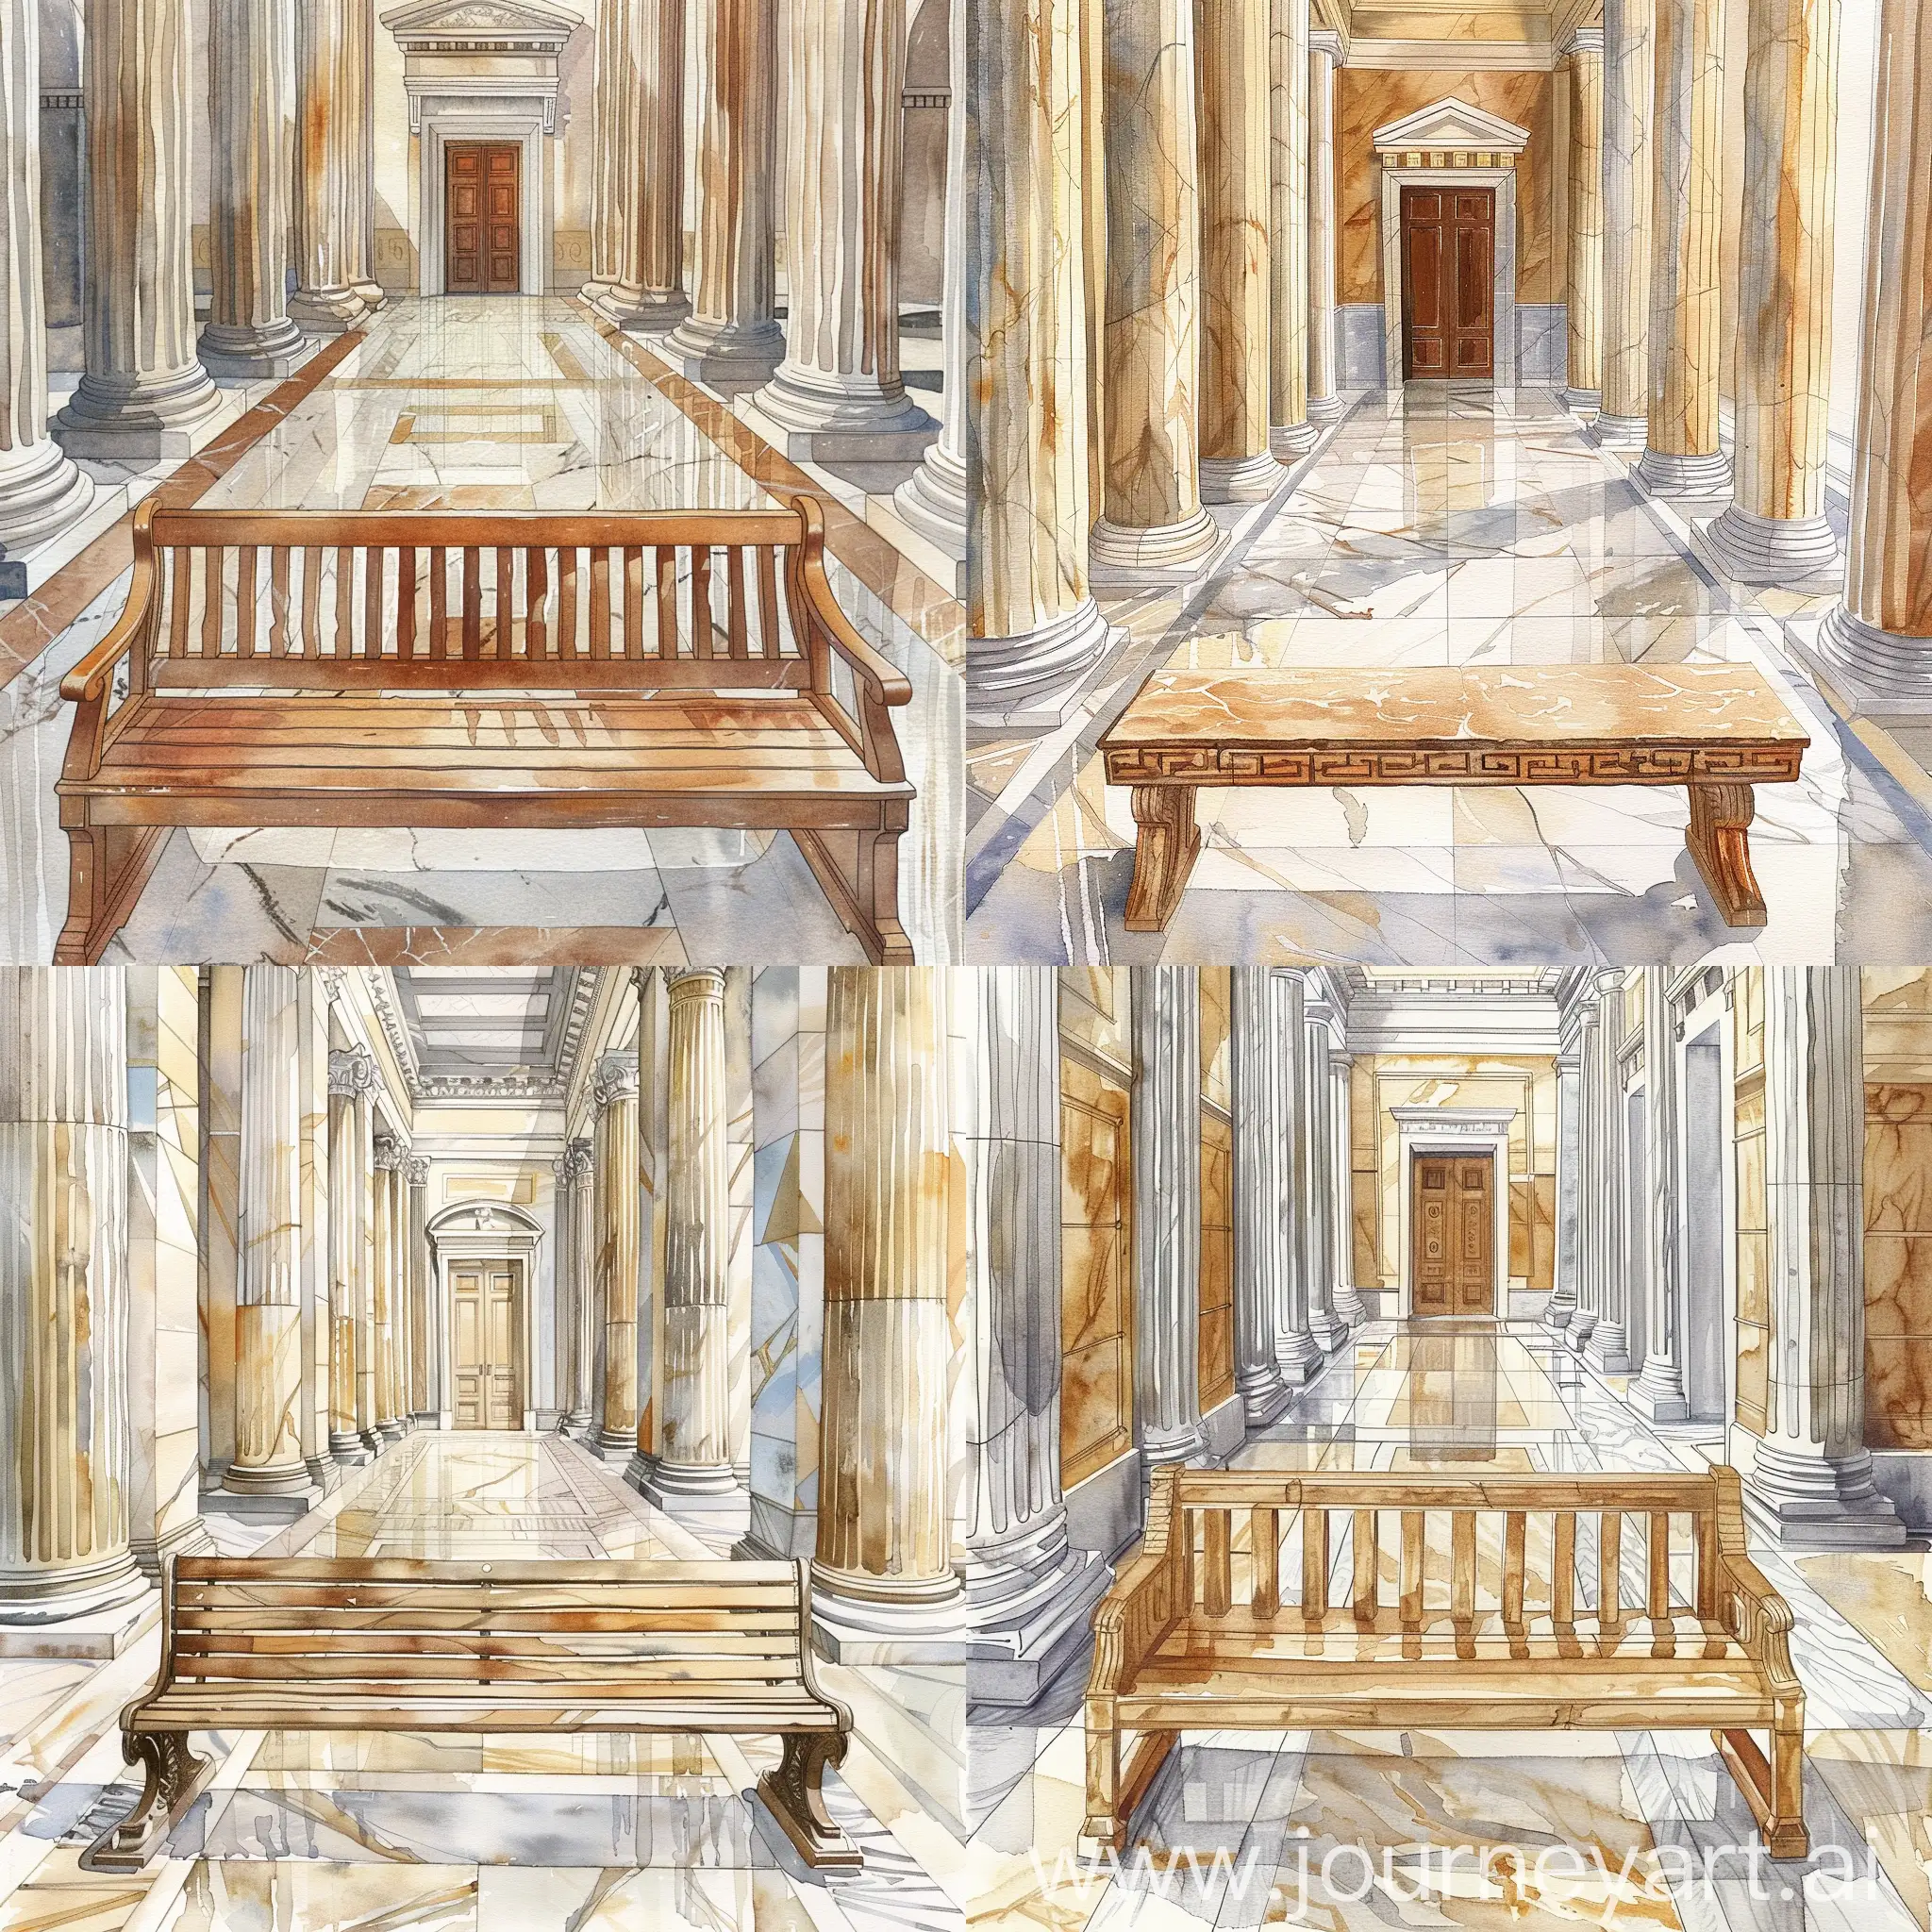 watercolor illustration of a bench without armrests in Roman hall, marble floor, Greek columns, corridor with Roman door at the back, paster colors, high quality details and clear lines